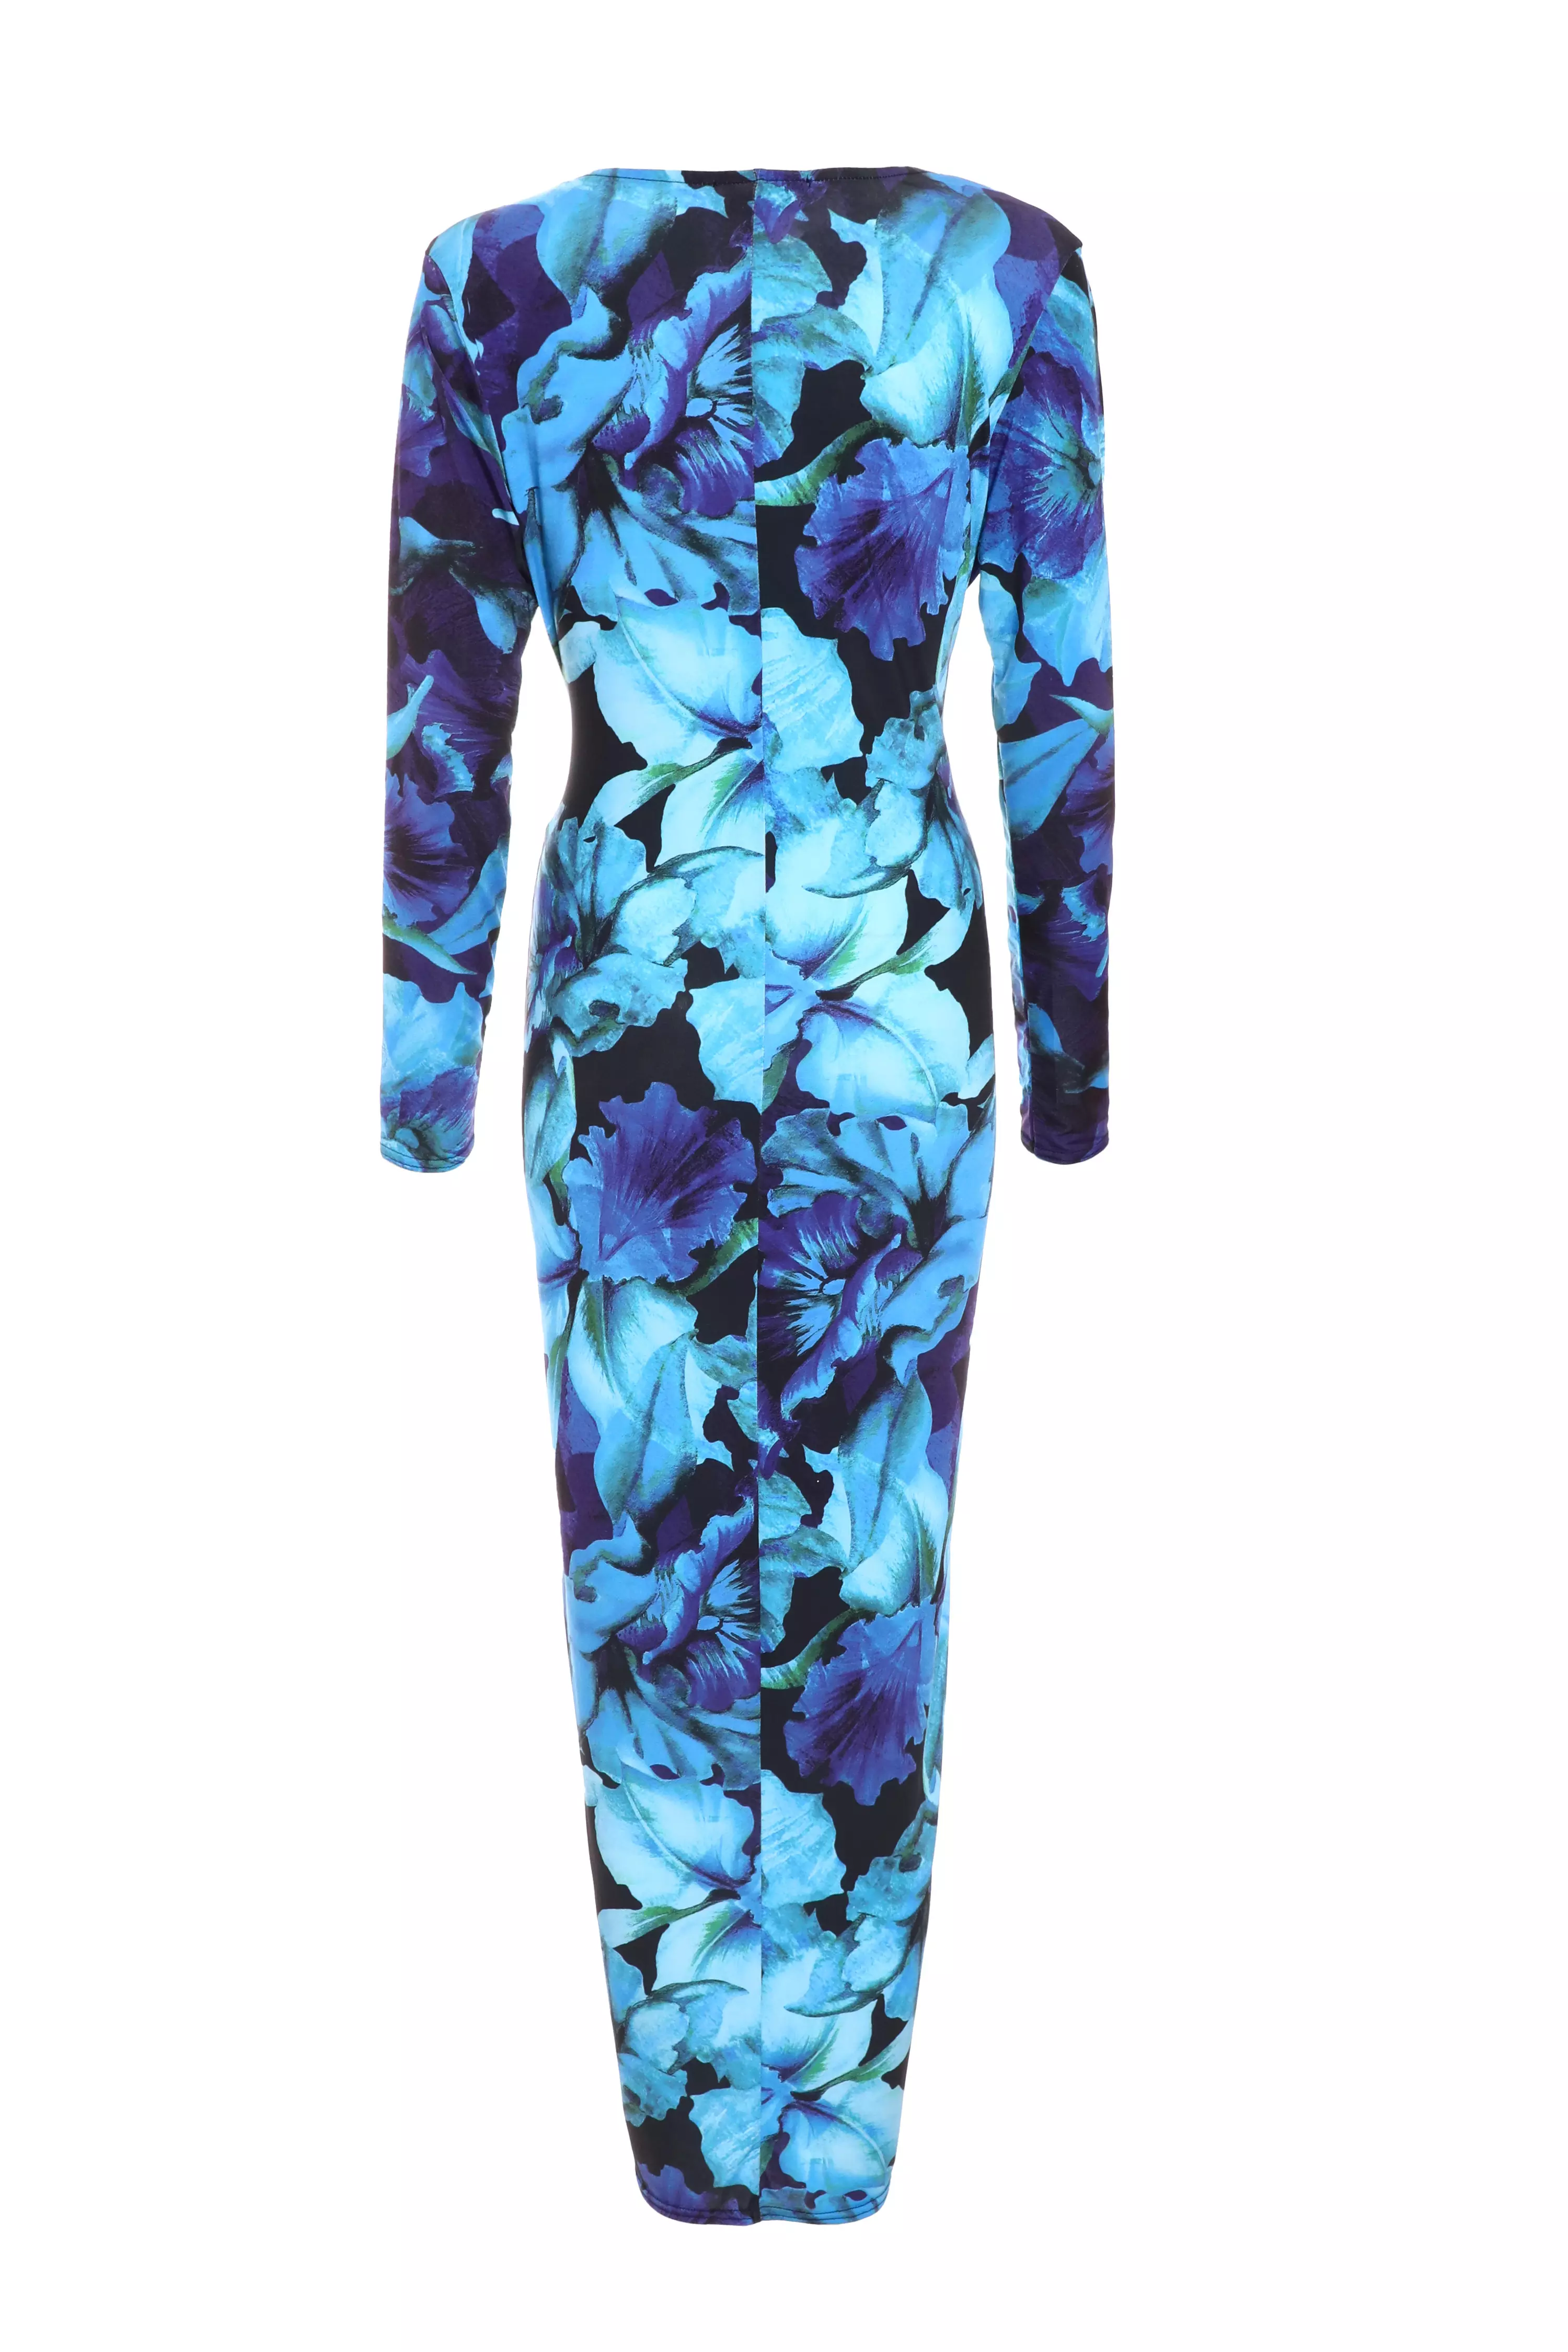 Blue Floral Ruched Maxi Dress